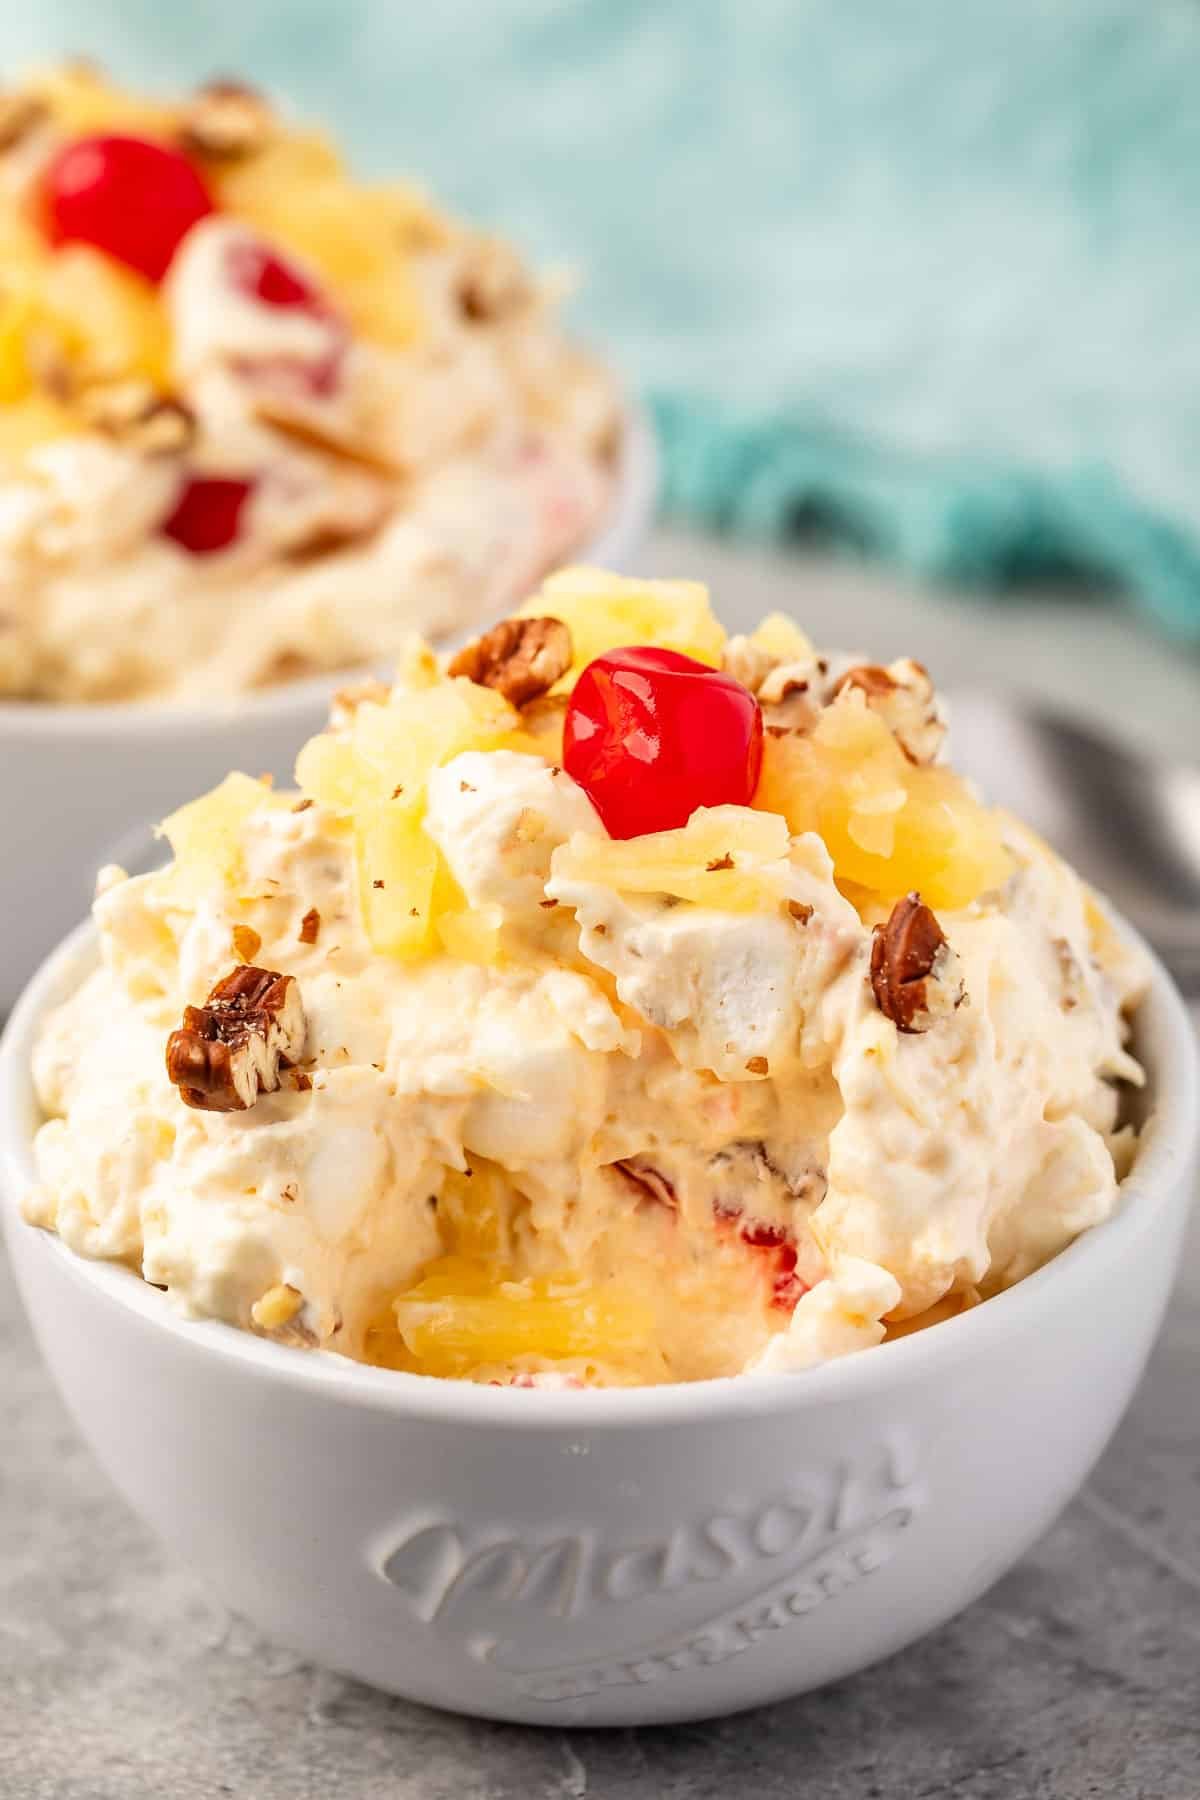 pineapple fluff with nuts and cherries on top in a white bowl.